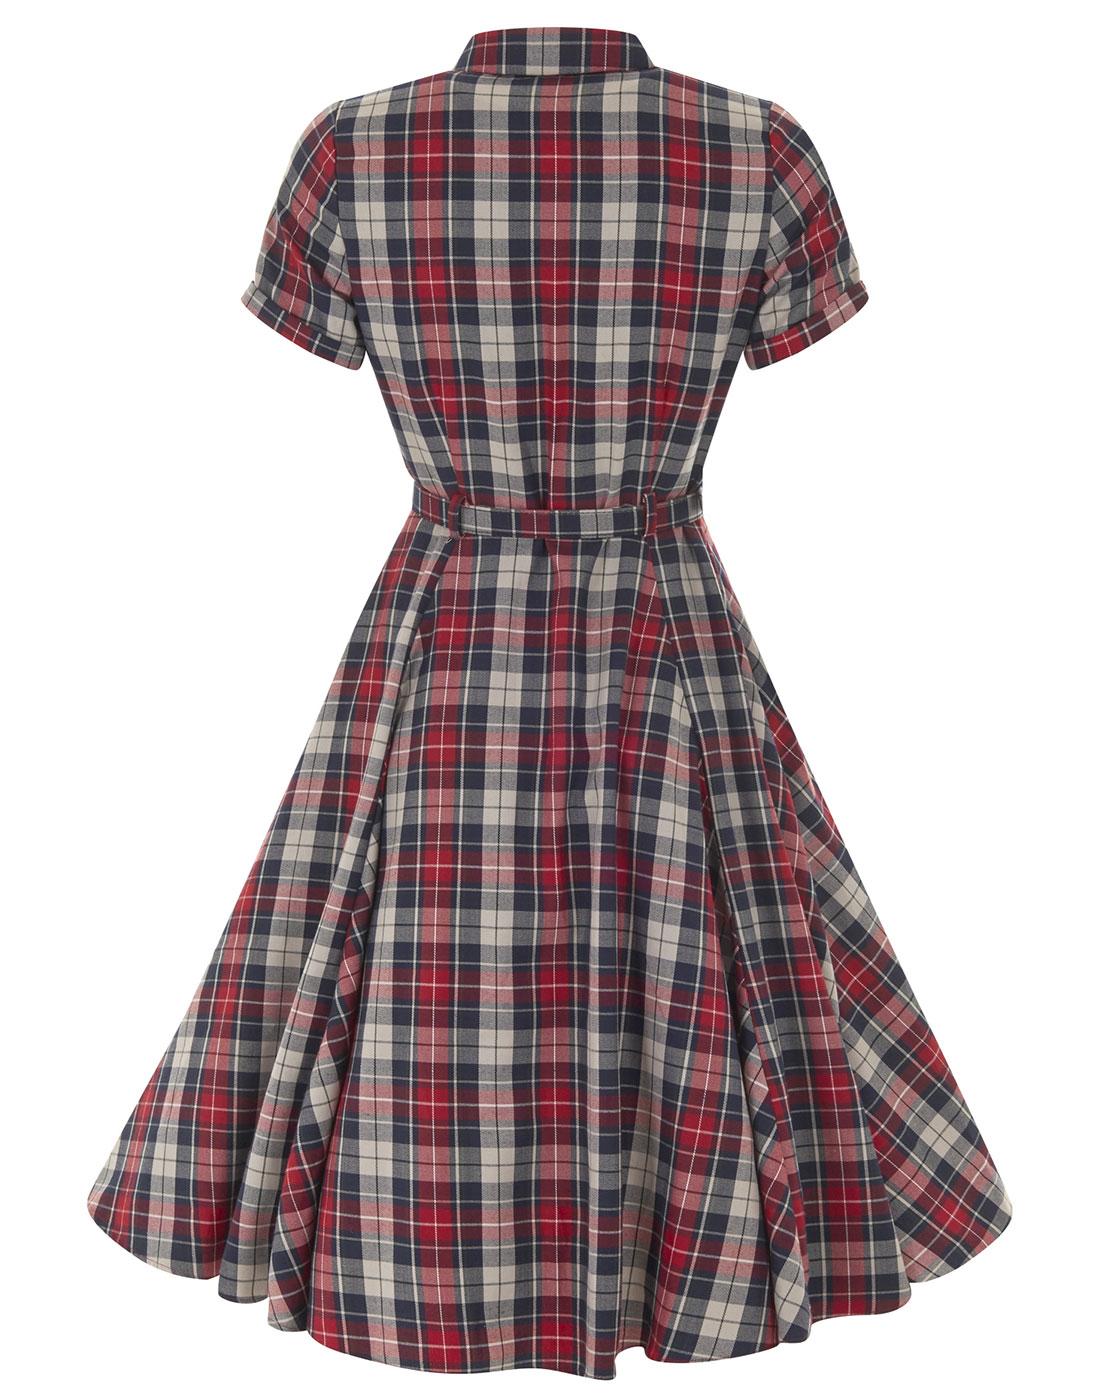 COLLECTIF Caterina Sherwood Check Swing Dress in Navy/Red